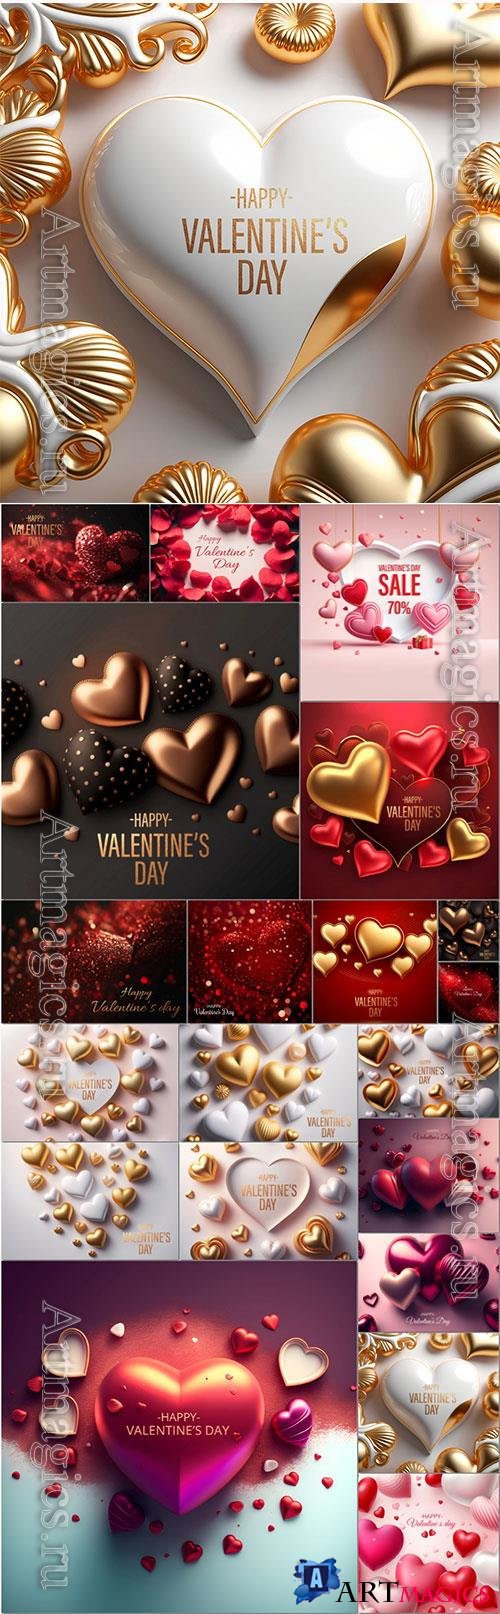 Happy valentine's day, beautiful psd romantic backgrounds